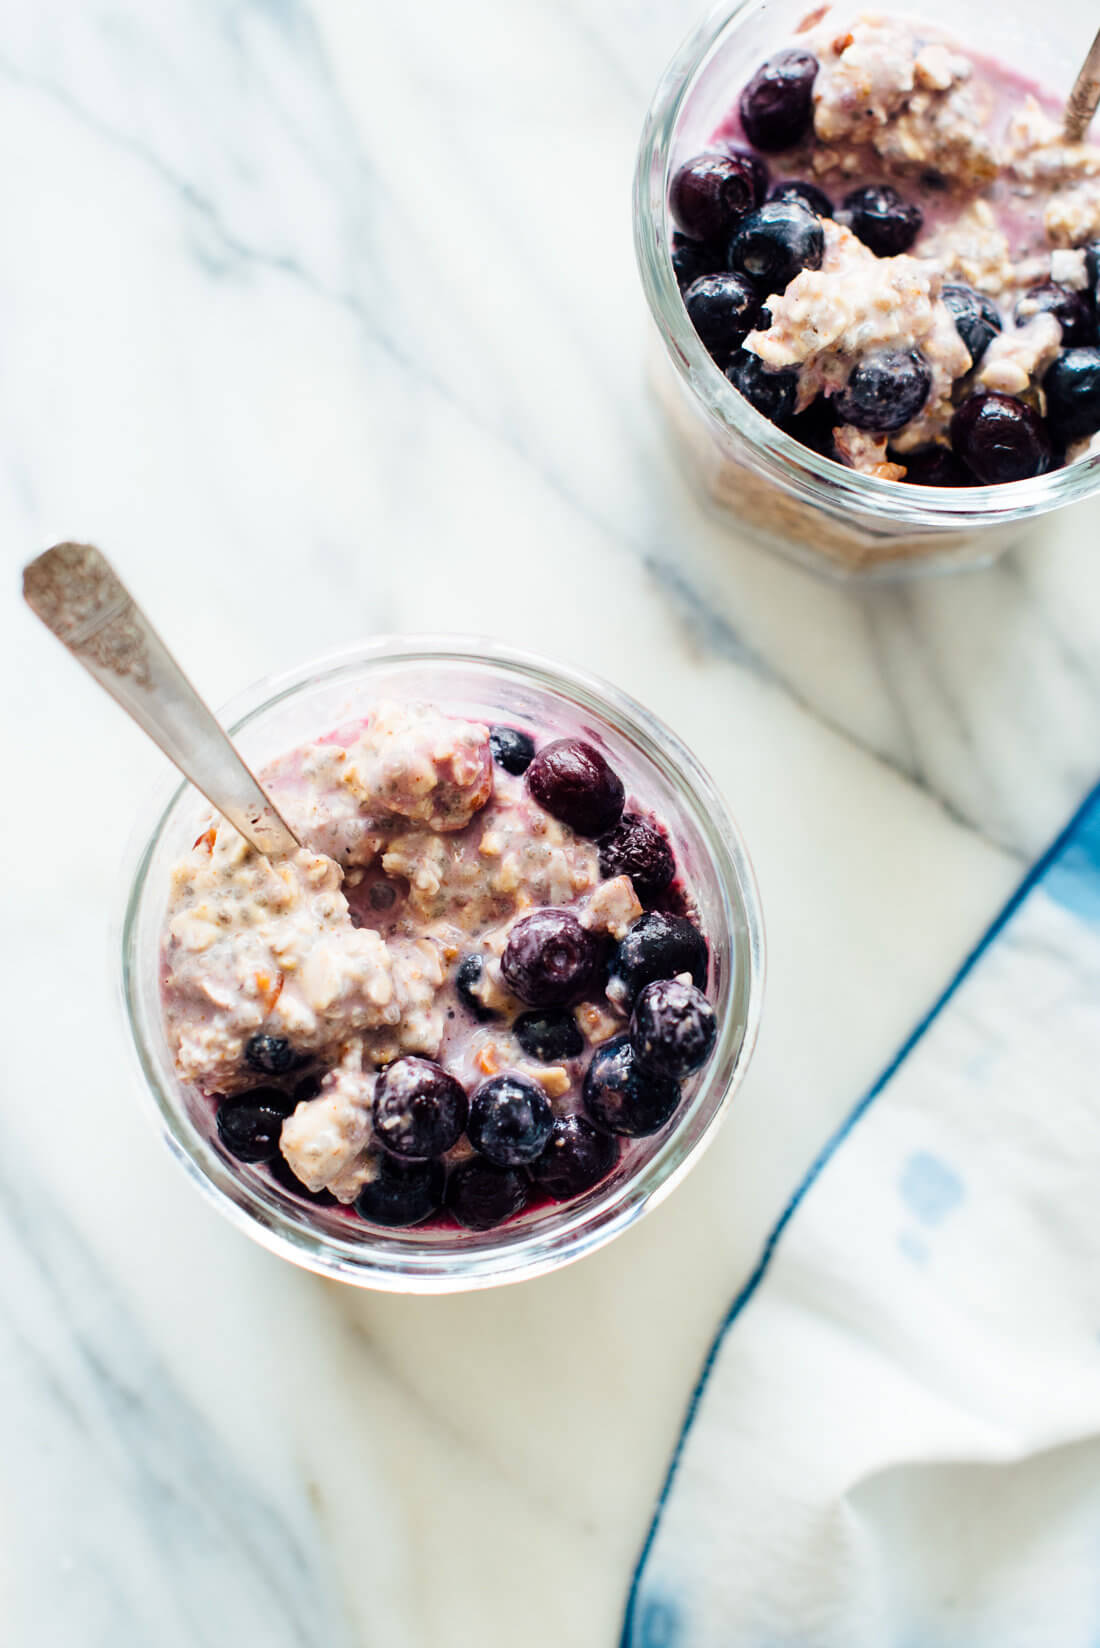 Find my favorite overnight oats recipe and learn everything about overnight oats at cookieandkate.com